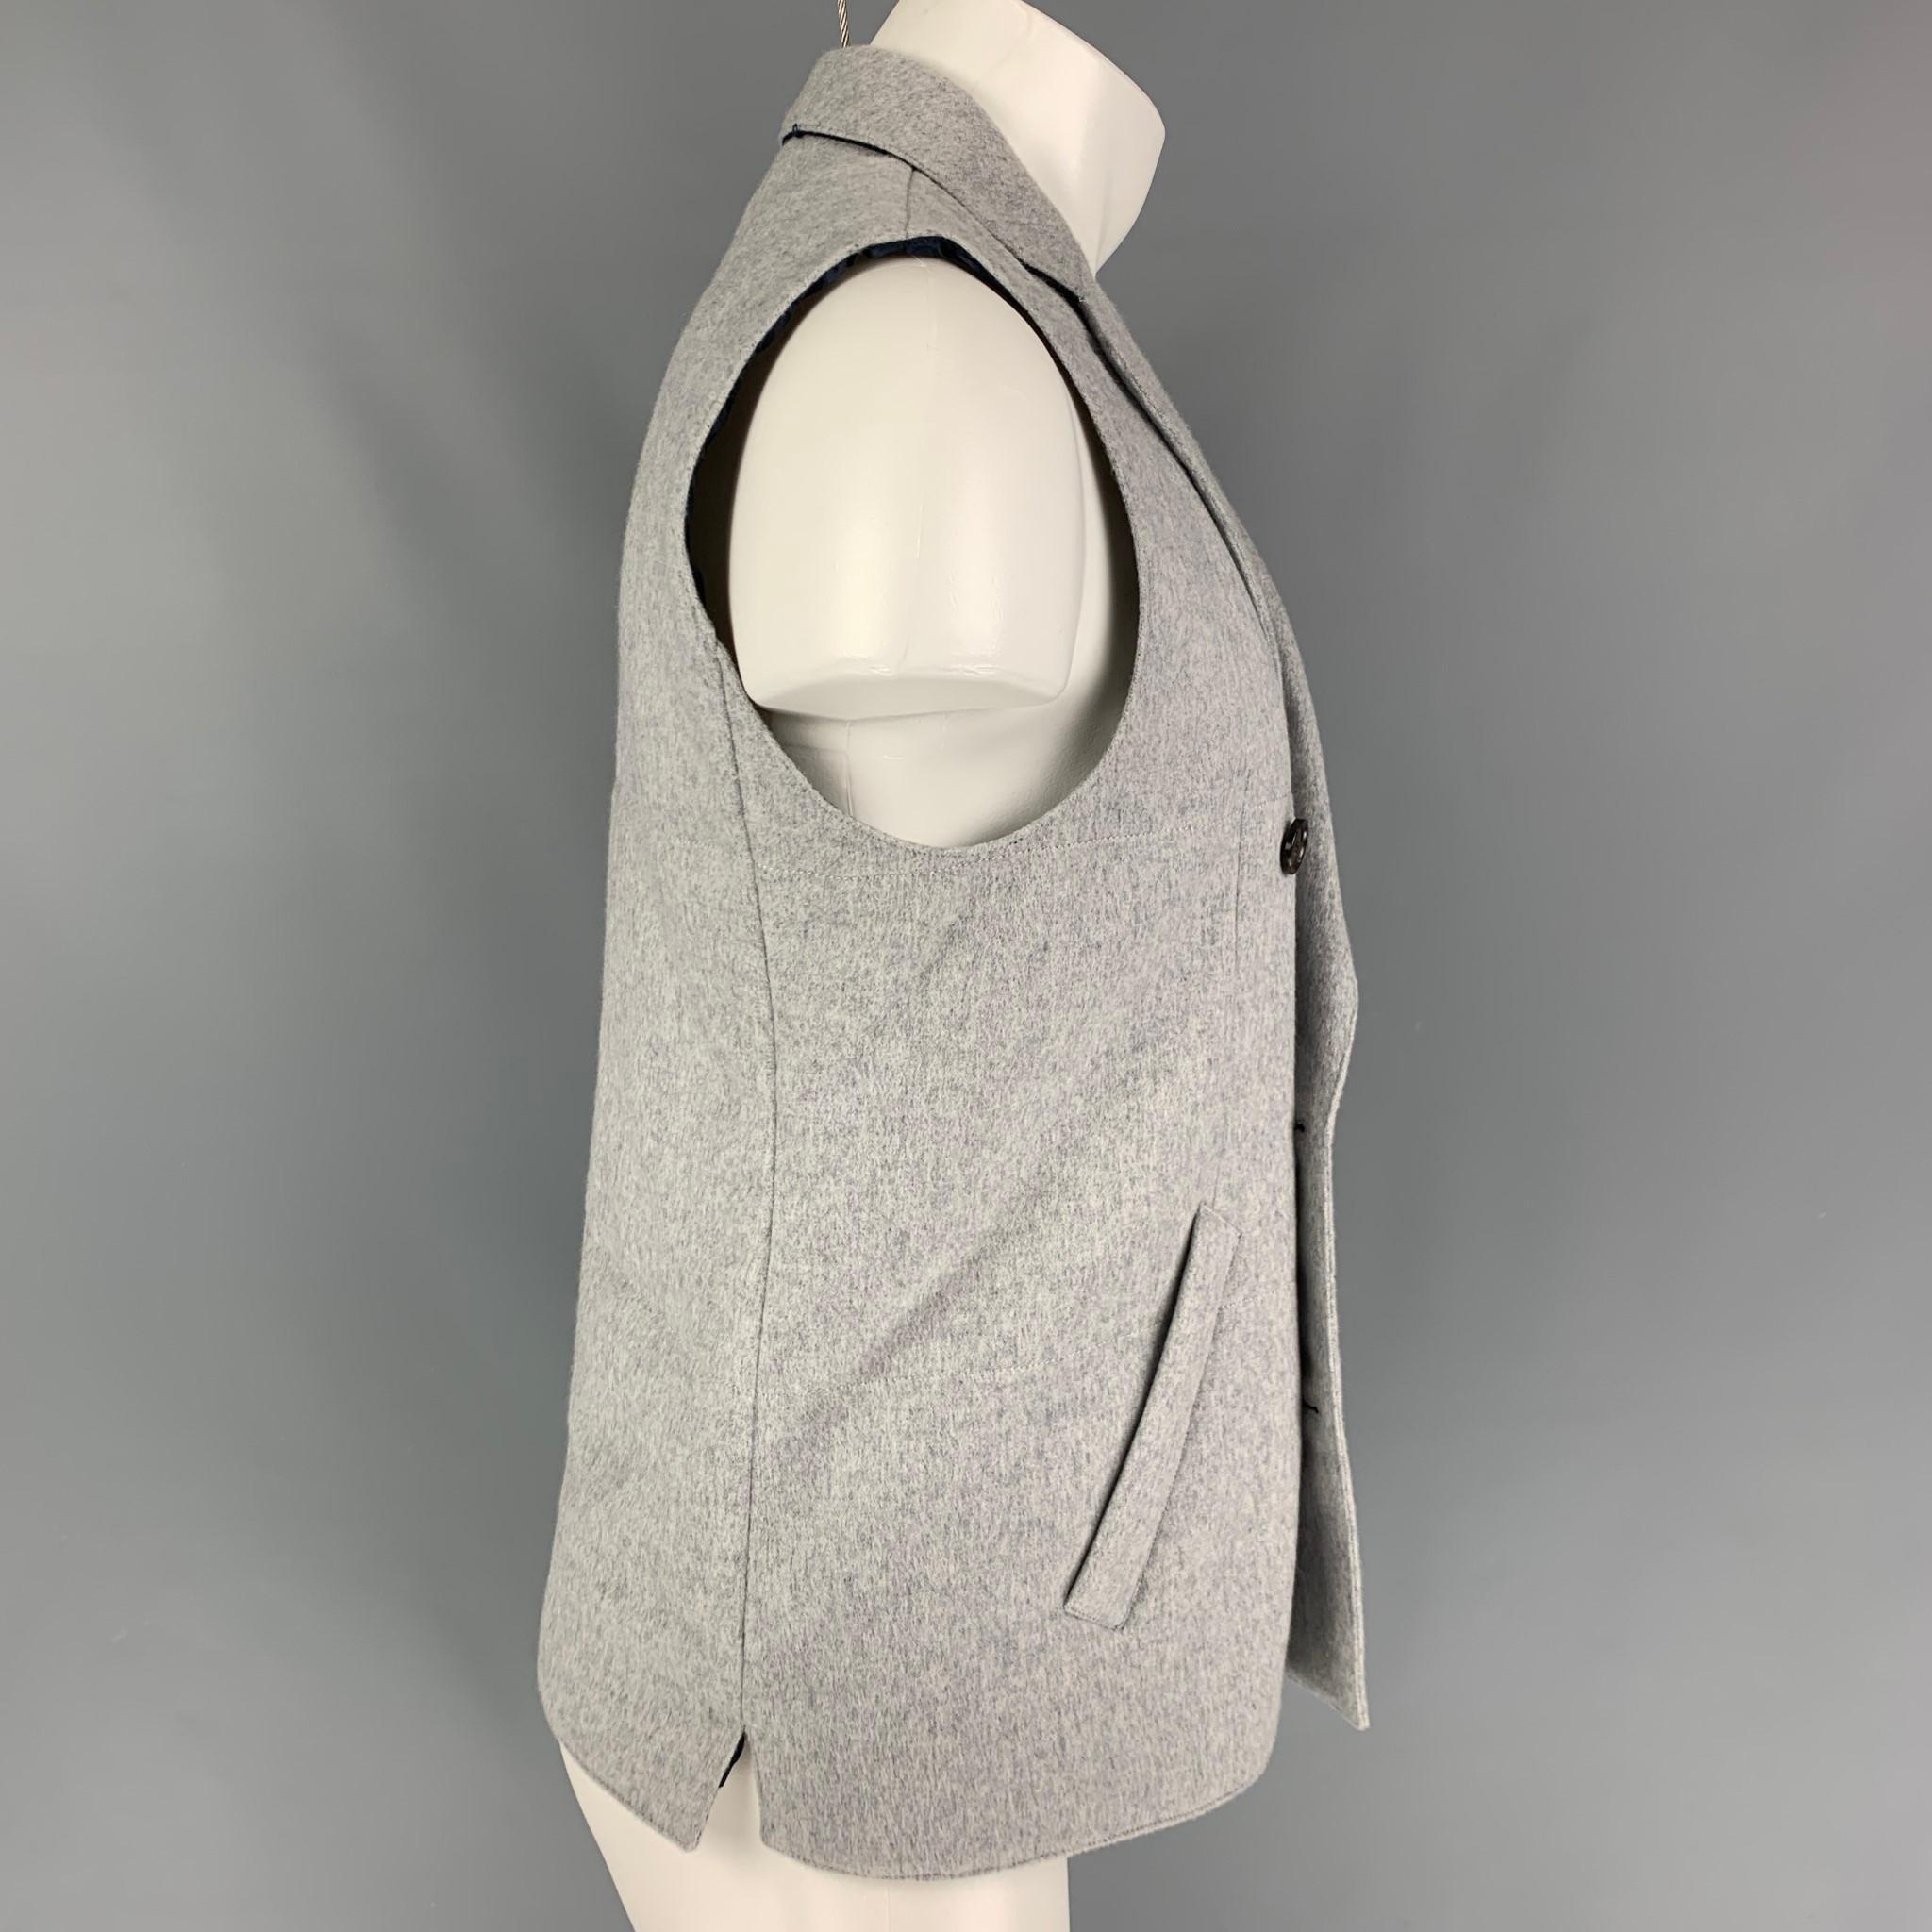 SUIT SUPPLY vest comes in a grey quilted cashmere featuring a notch lapel, slit pockets, and a double breasted closure. 

Very Good Pre-Owned Condition.
Marked: M

Measurements:

Shoulder: 16 in.
Chest: 38 in.
Length: 25 in. 